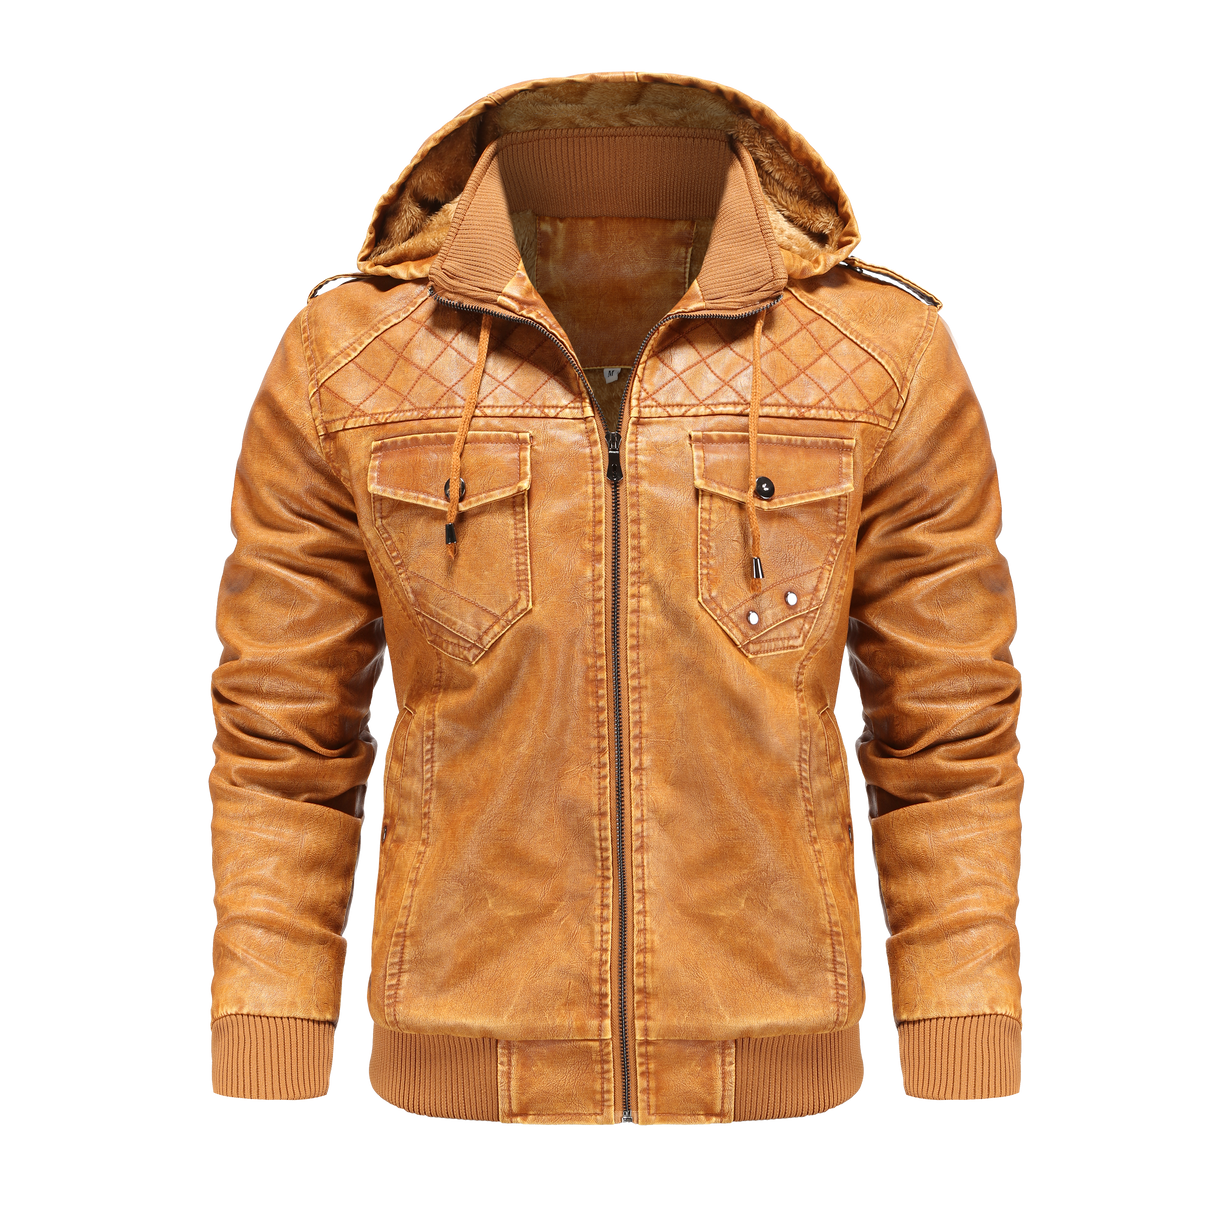 H.D Crypto Leather Jacket